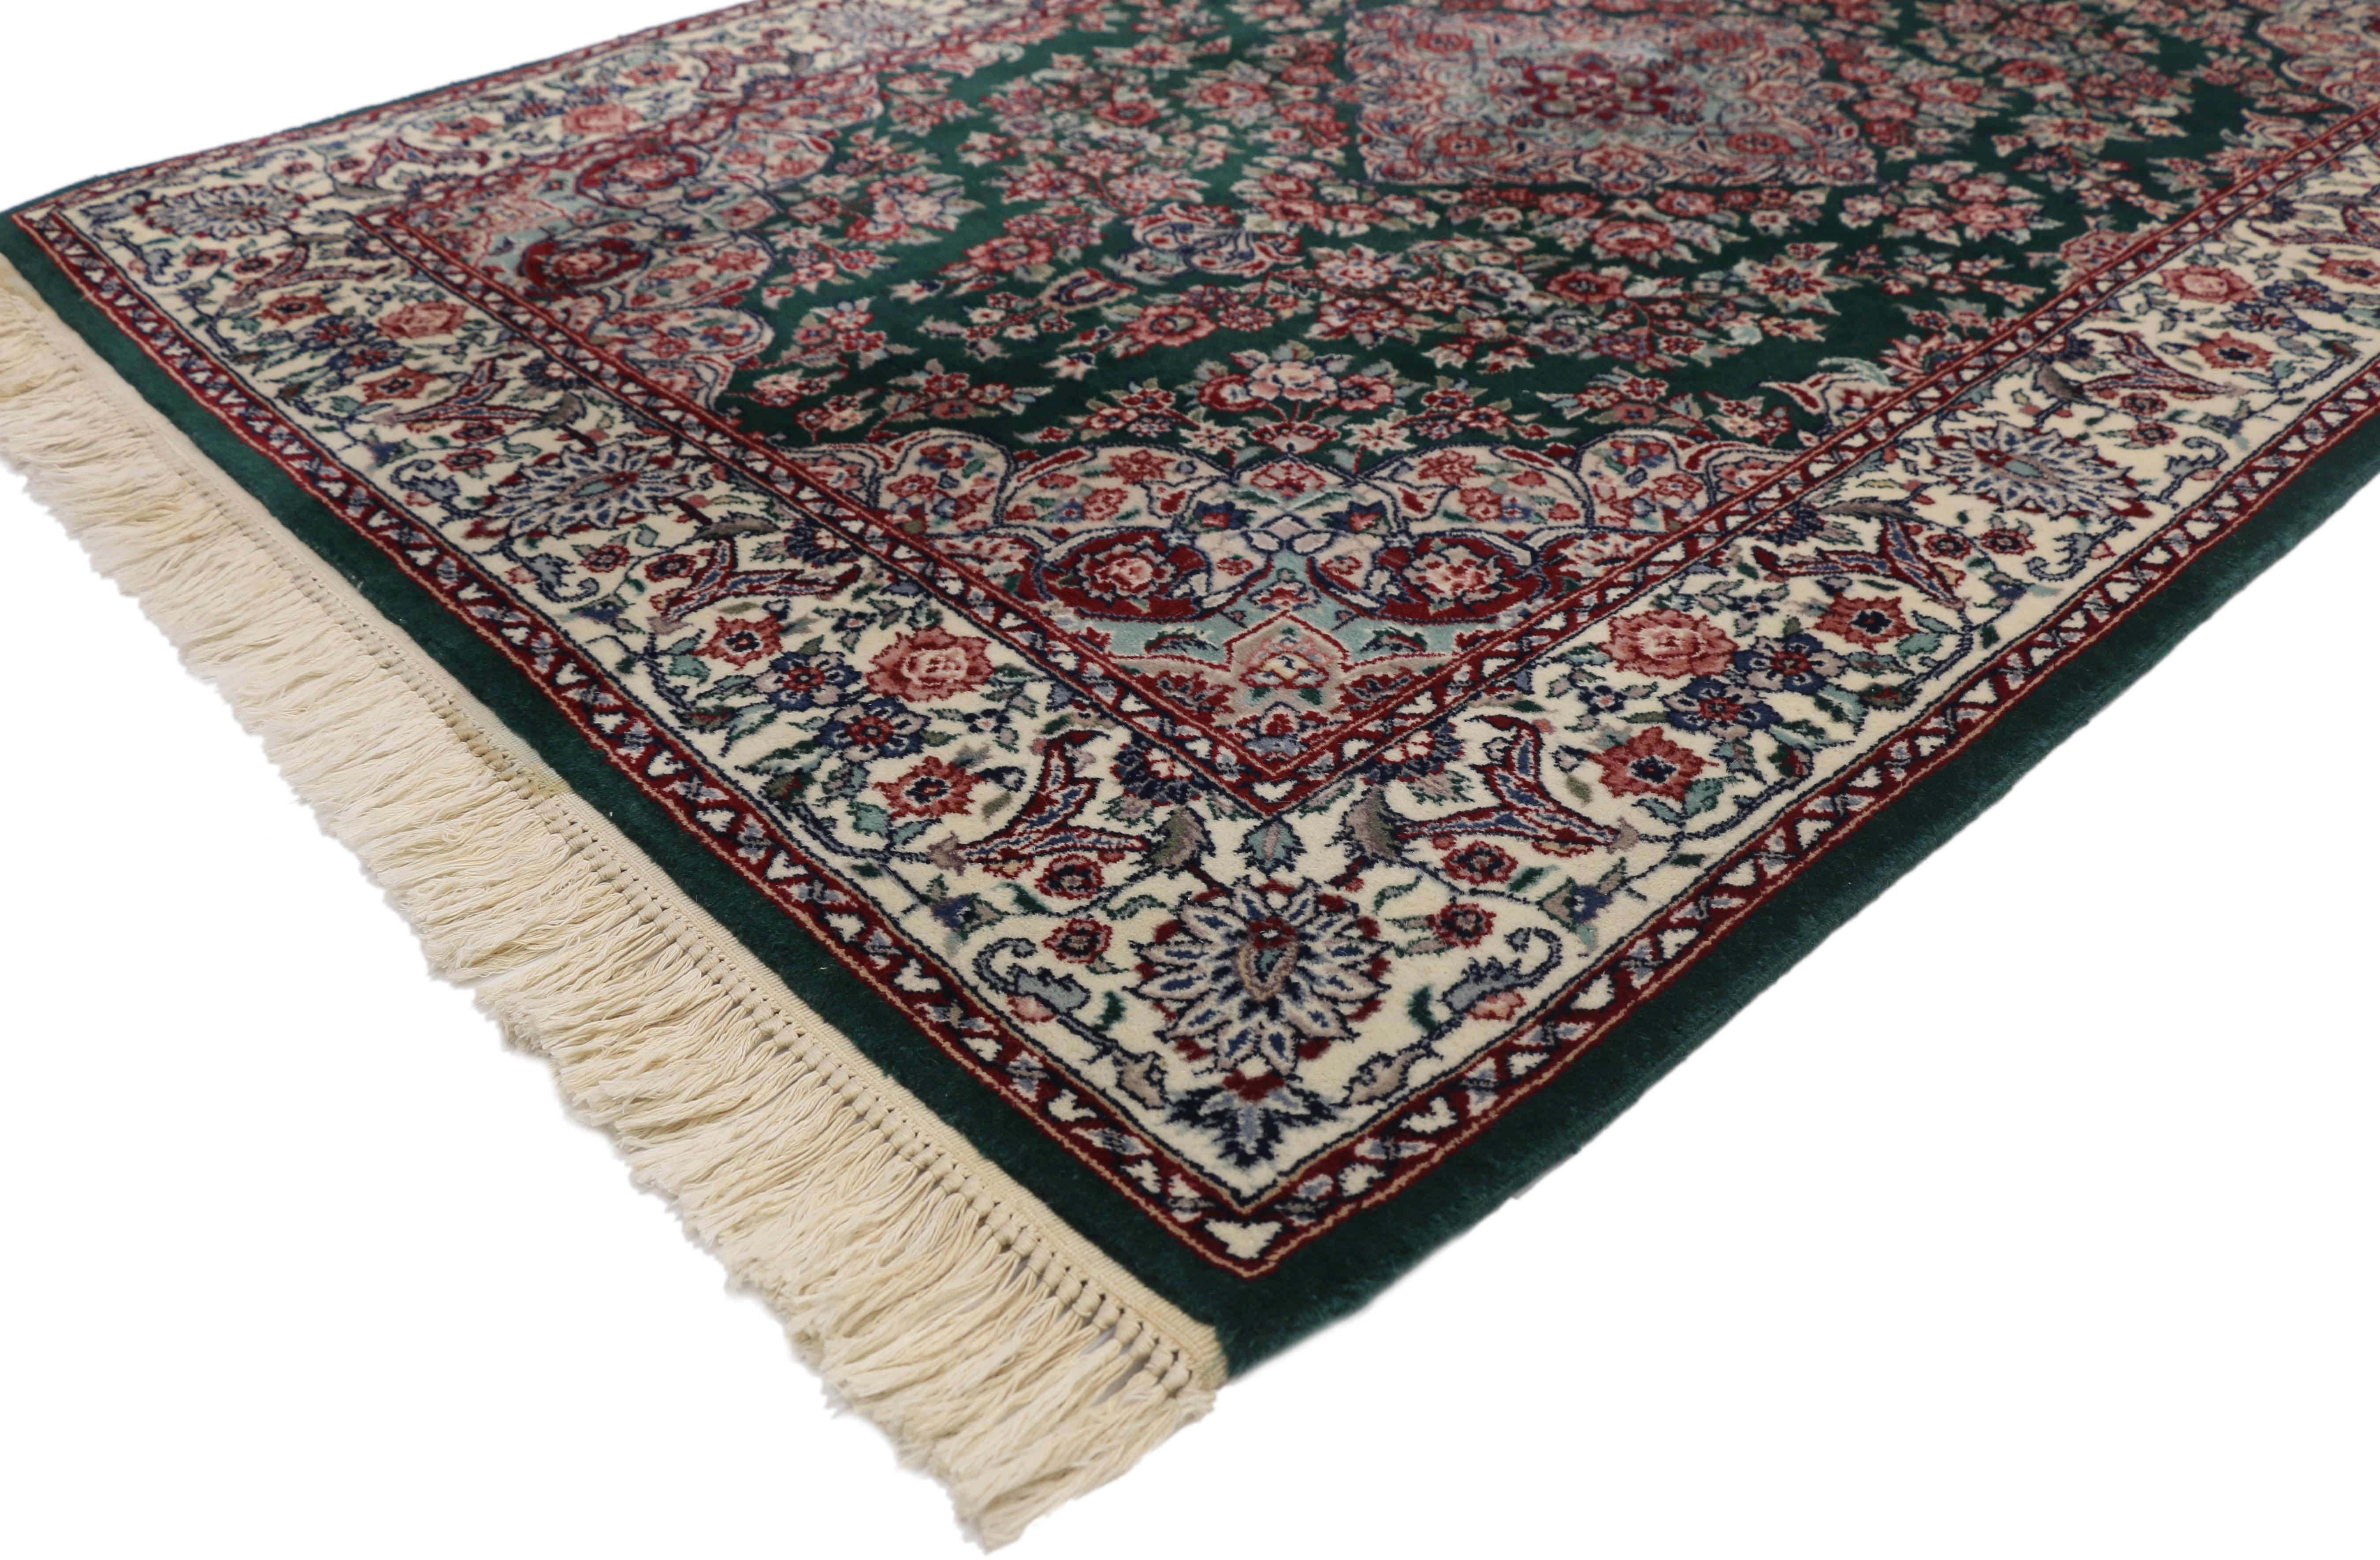 77295 vintage Chinese Floral rug with Persian Design and English Country style. This hand knotted wool vintage Chinese floral rug beautifully embodies a traditional Persian design and English Country style. It features a traditional lobed diamond